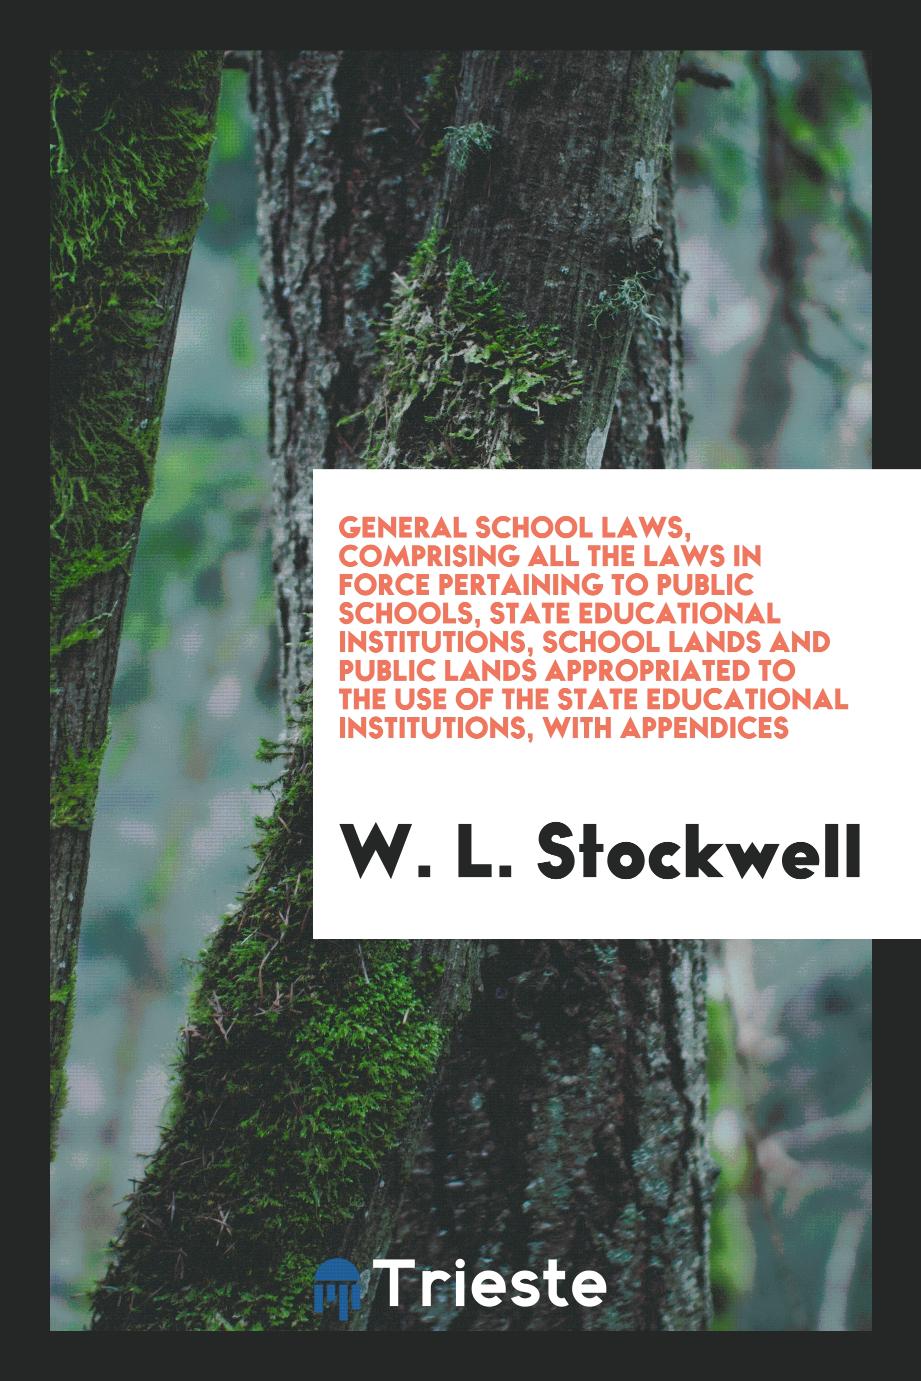 General school laws, comprising all the laws in force pertaining to public schools, state educational institutions, school lands and public lands appropriated to the use of the state educational institutions, with appendices